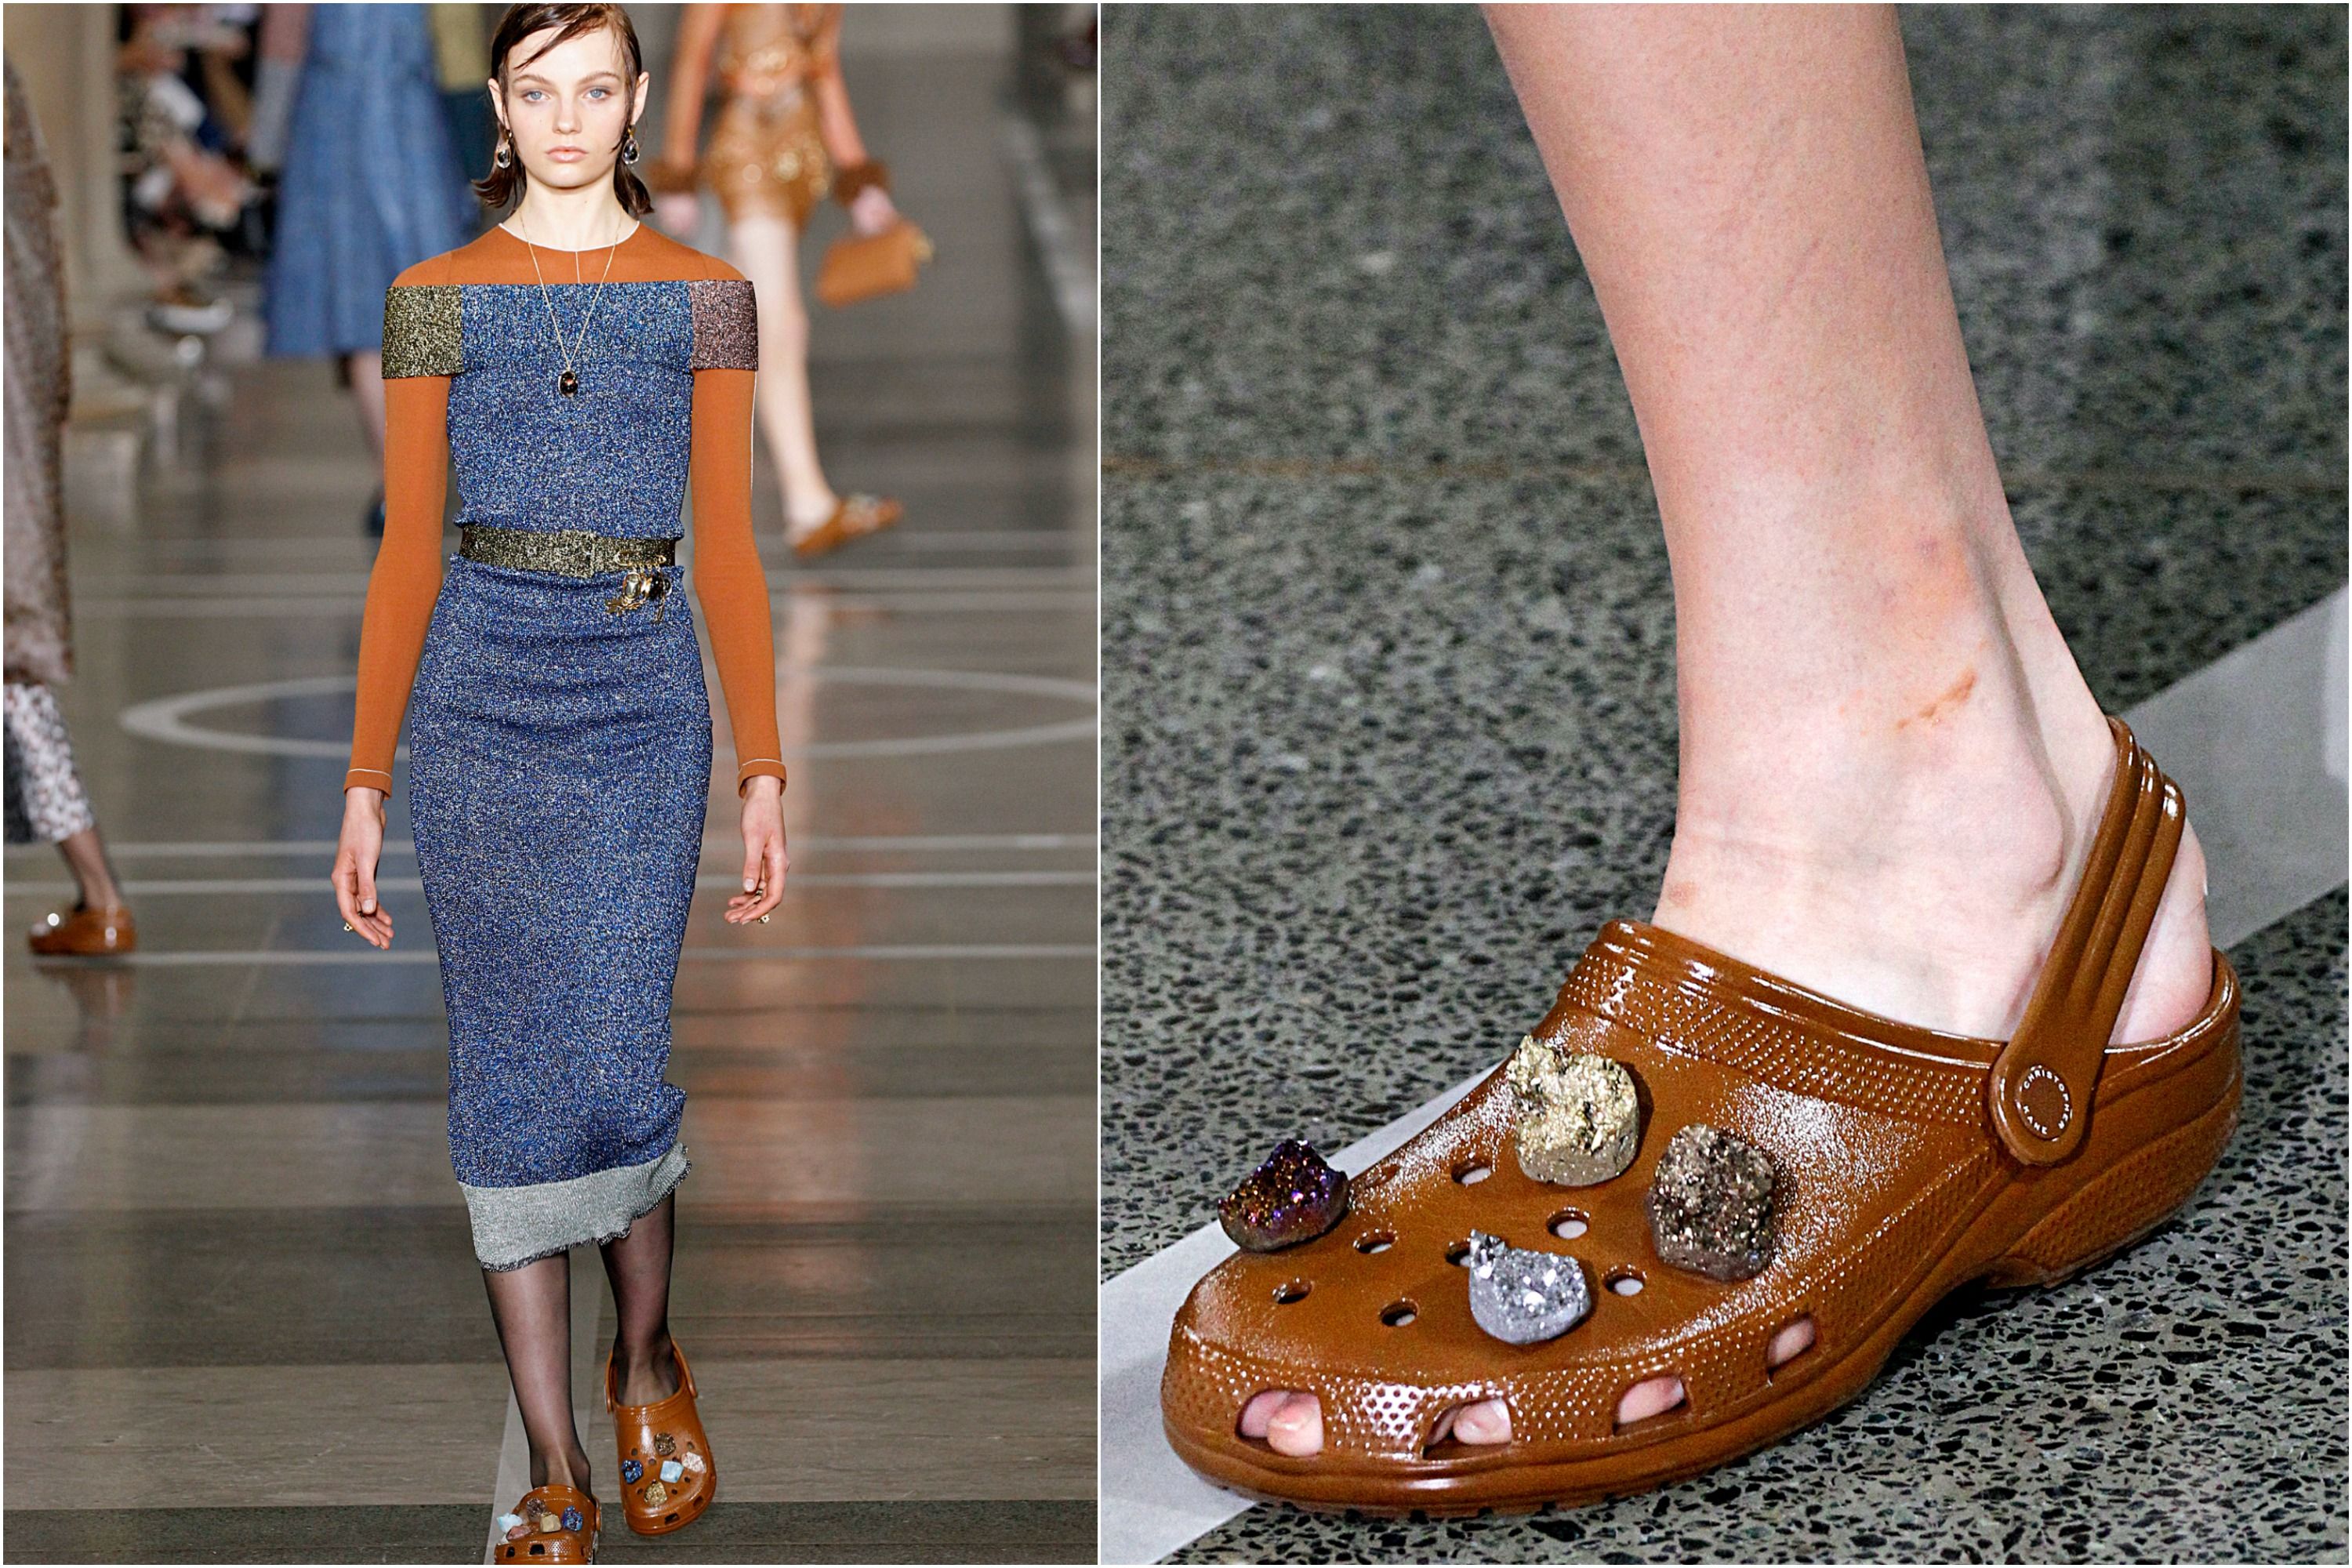 Crocs Are Officially on the Runway - Trend 2016